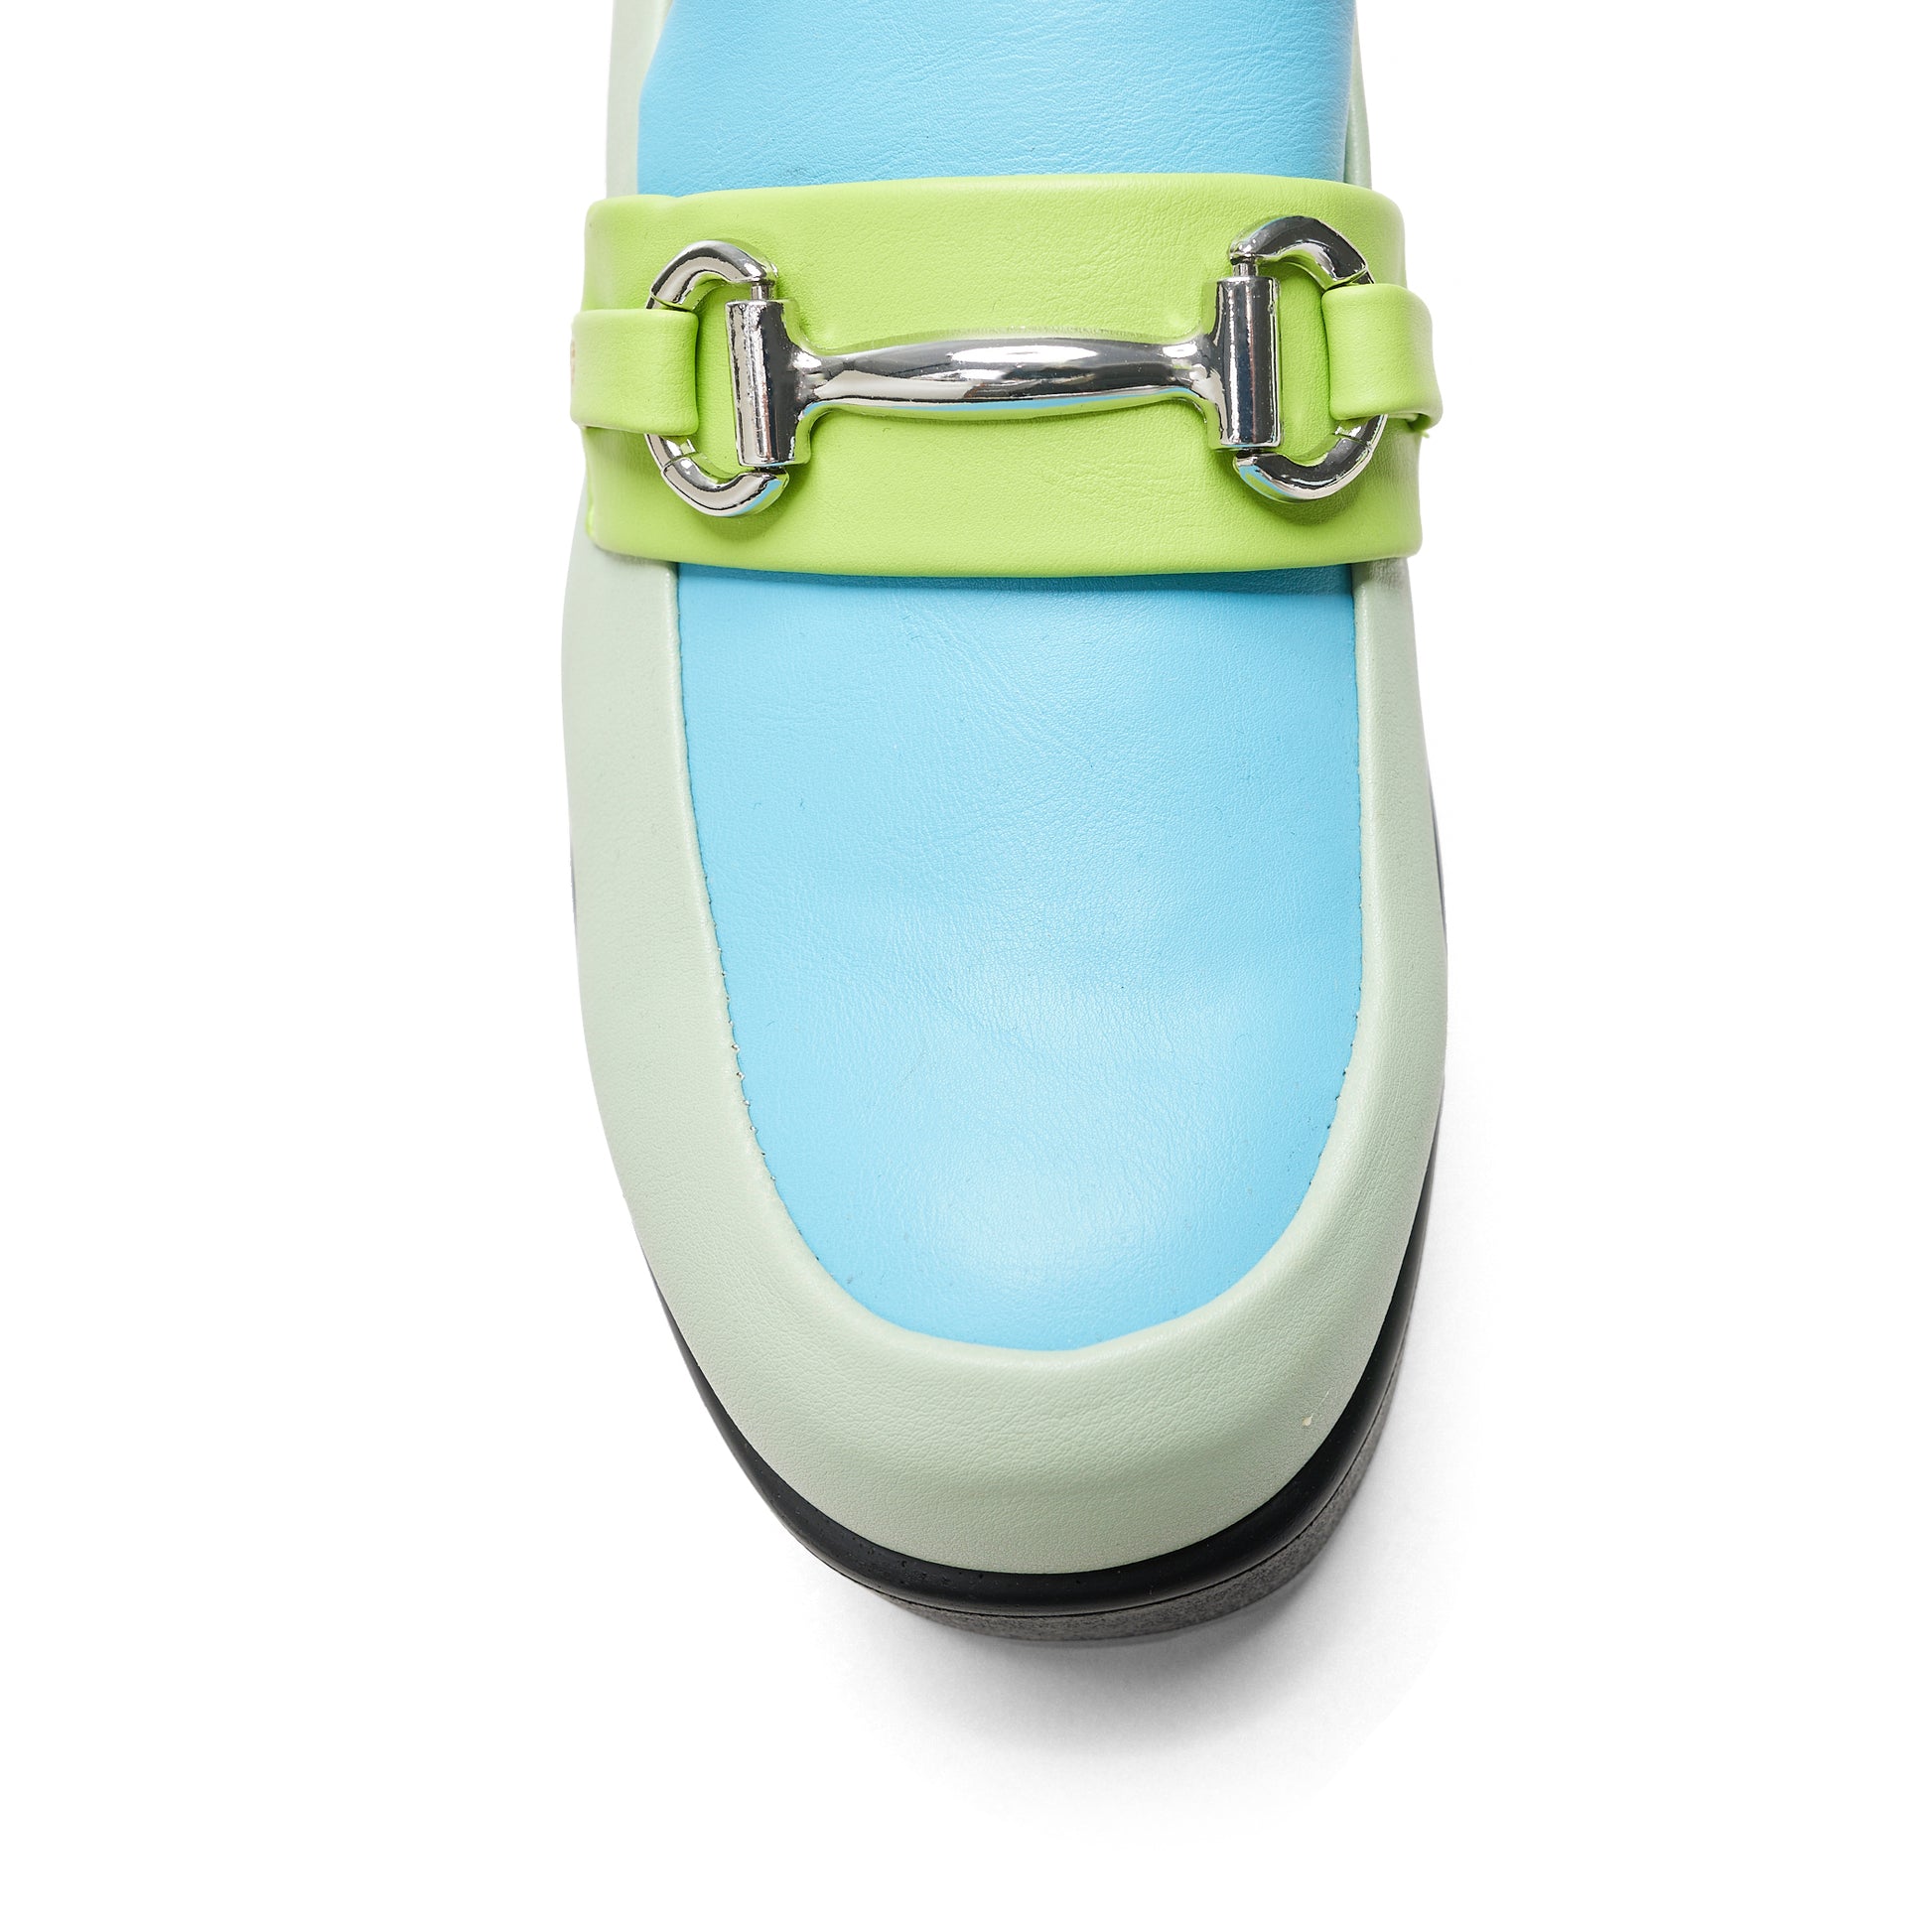 High Class Chunky Shoes - Mint Pastel - Shoes - KOI Footwear - Green - Top View